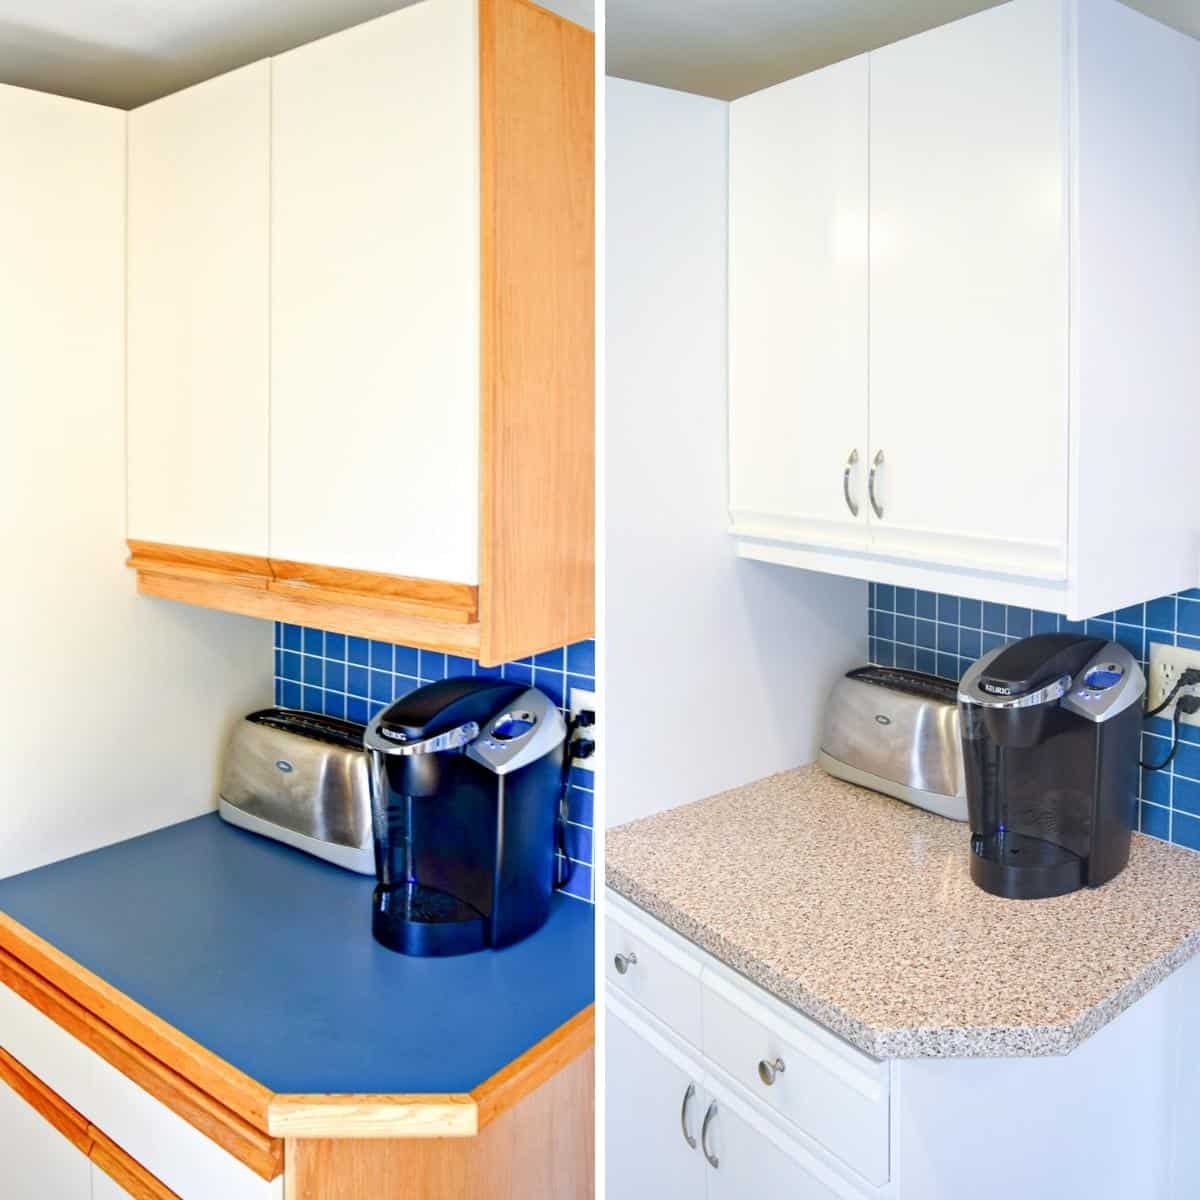 Before And After Painting Laminate Kitchen Cabinets Featured Image 